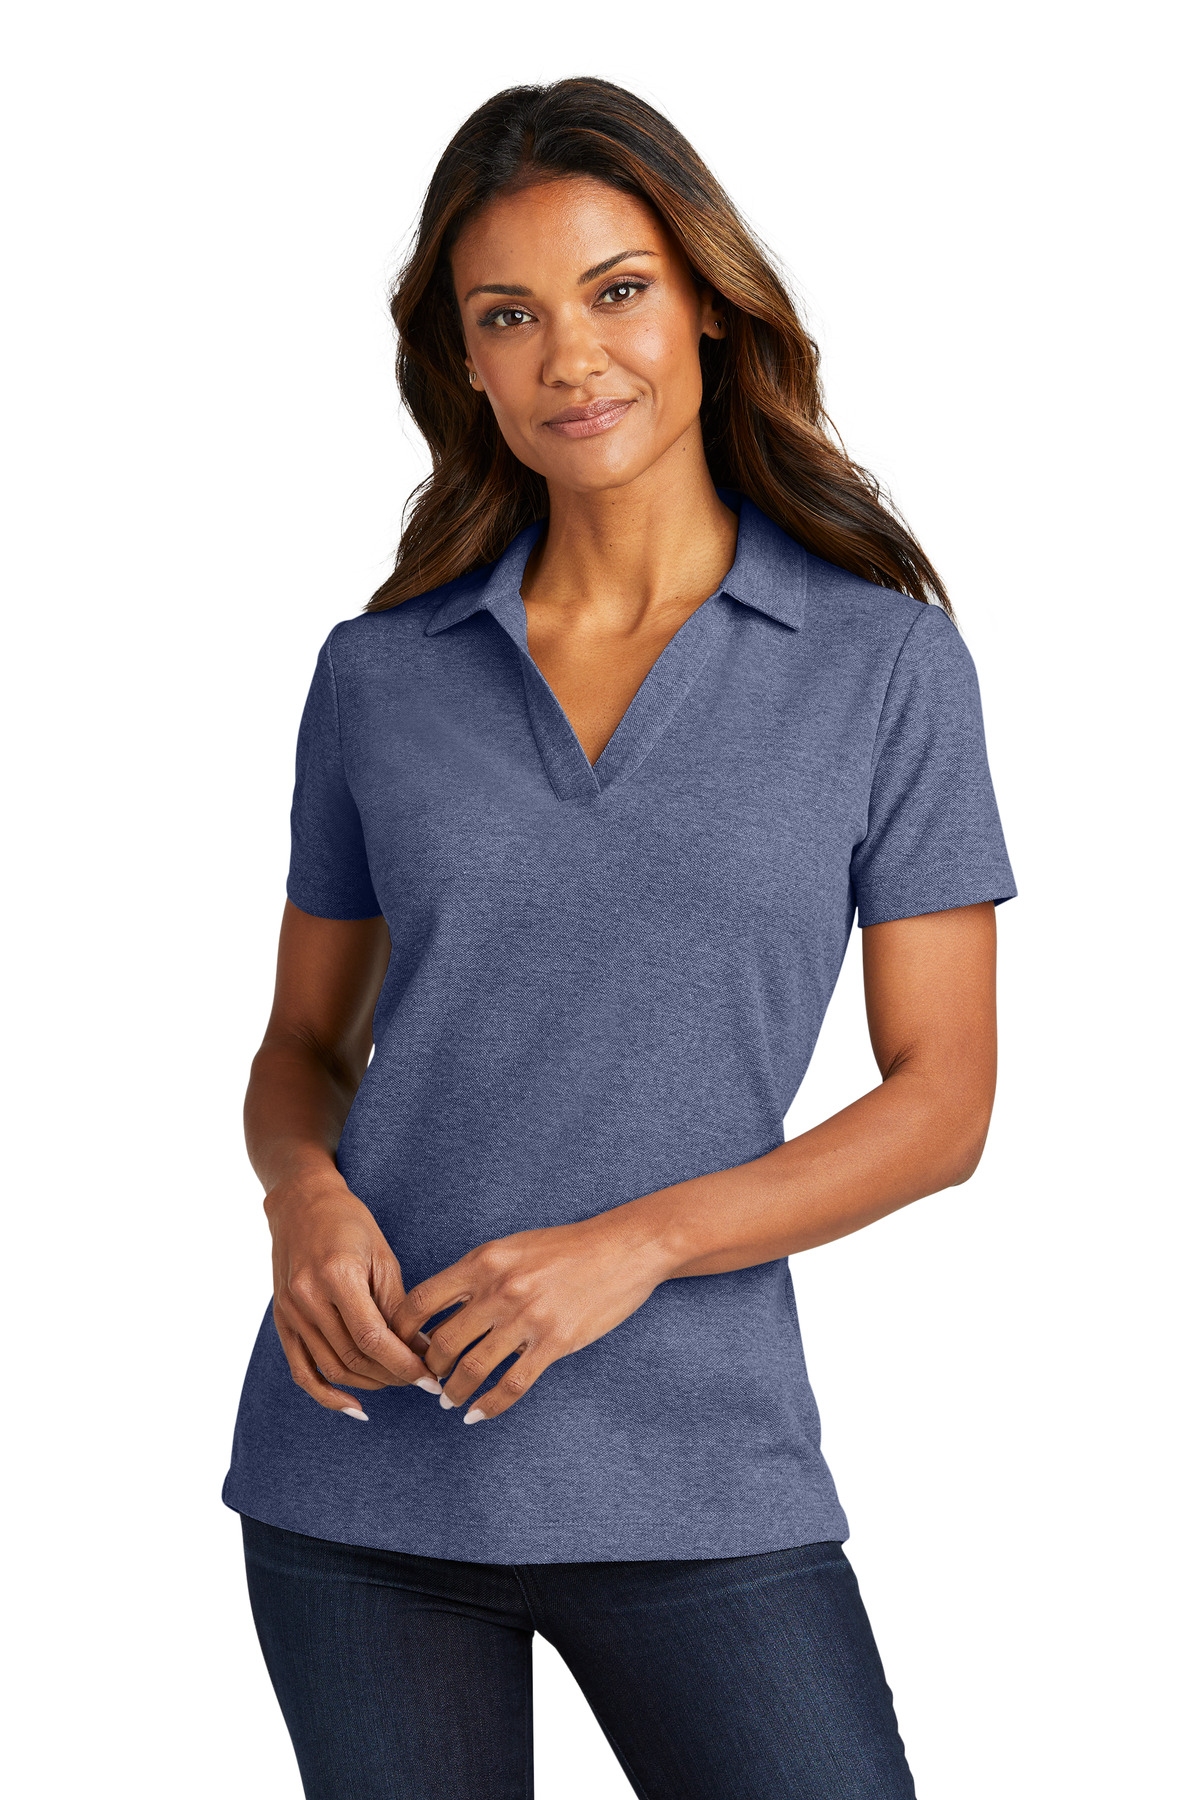 click to view Navy Heather